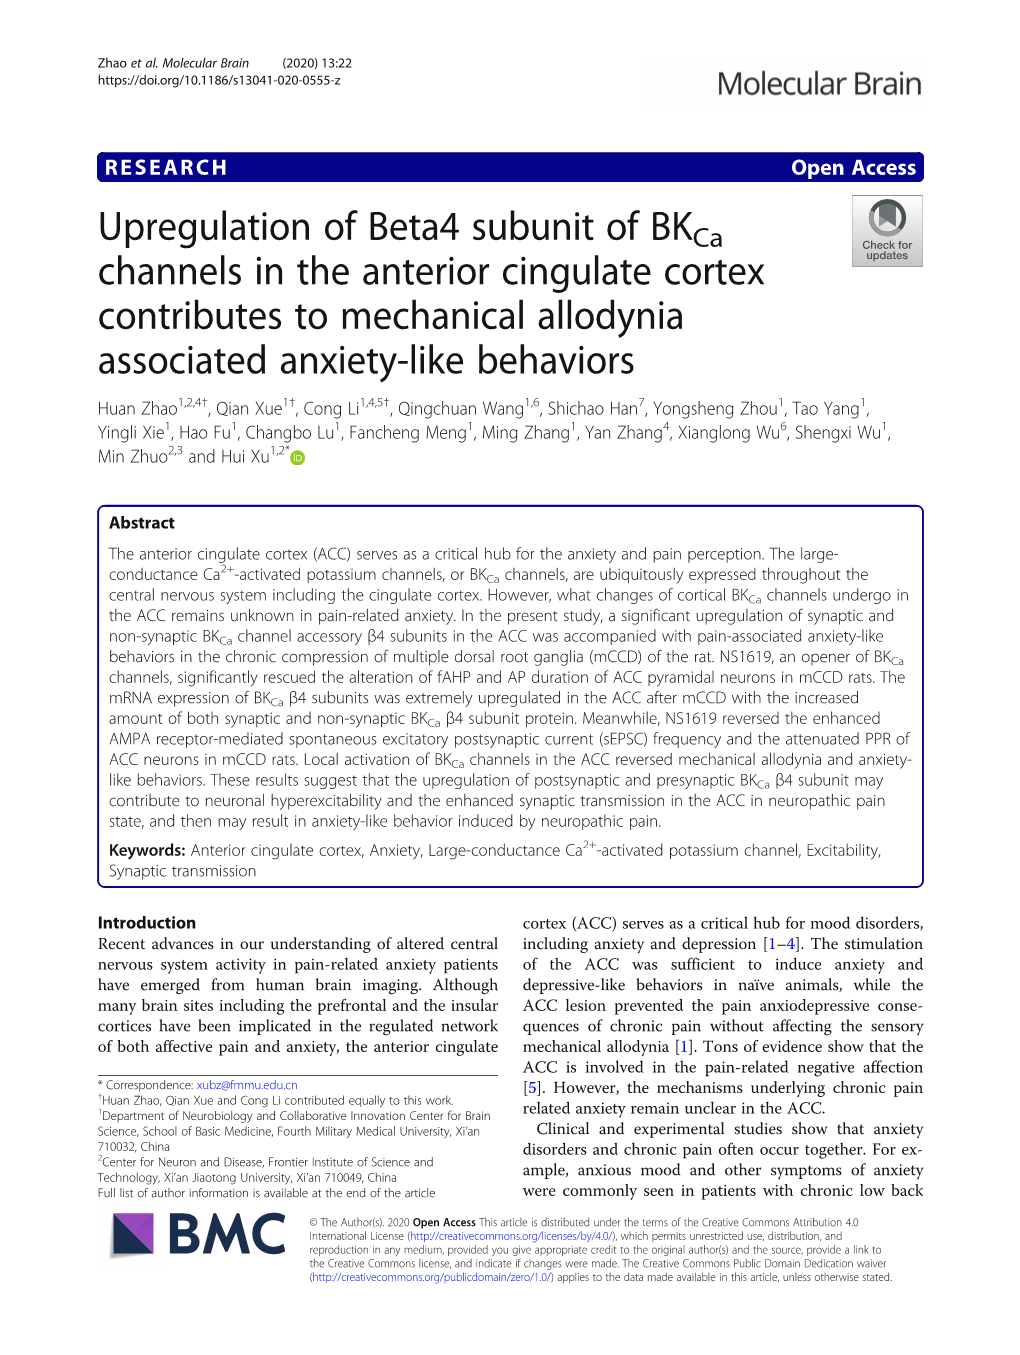 Upregulation of Beta4 Subunit of Bkca Channels in the Anterior